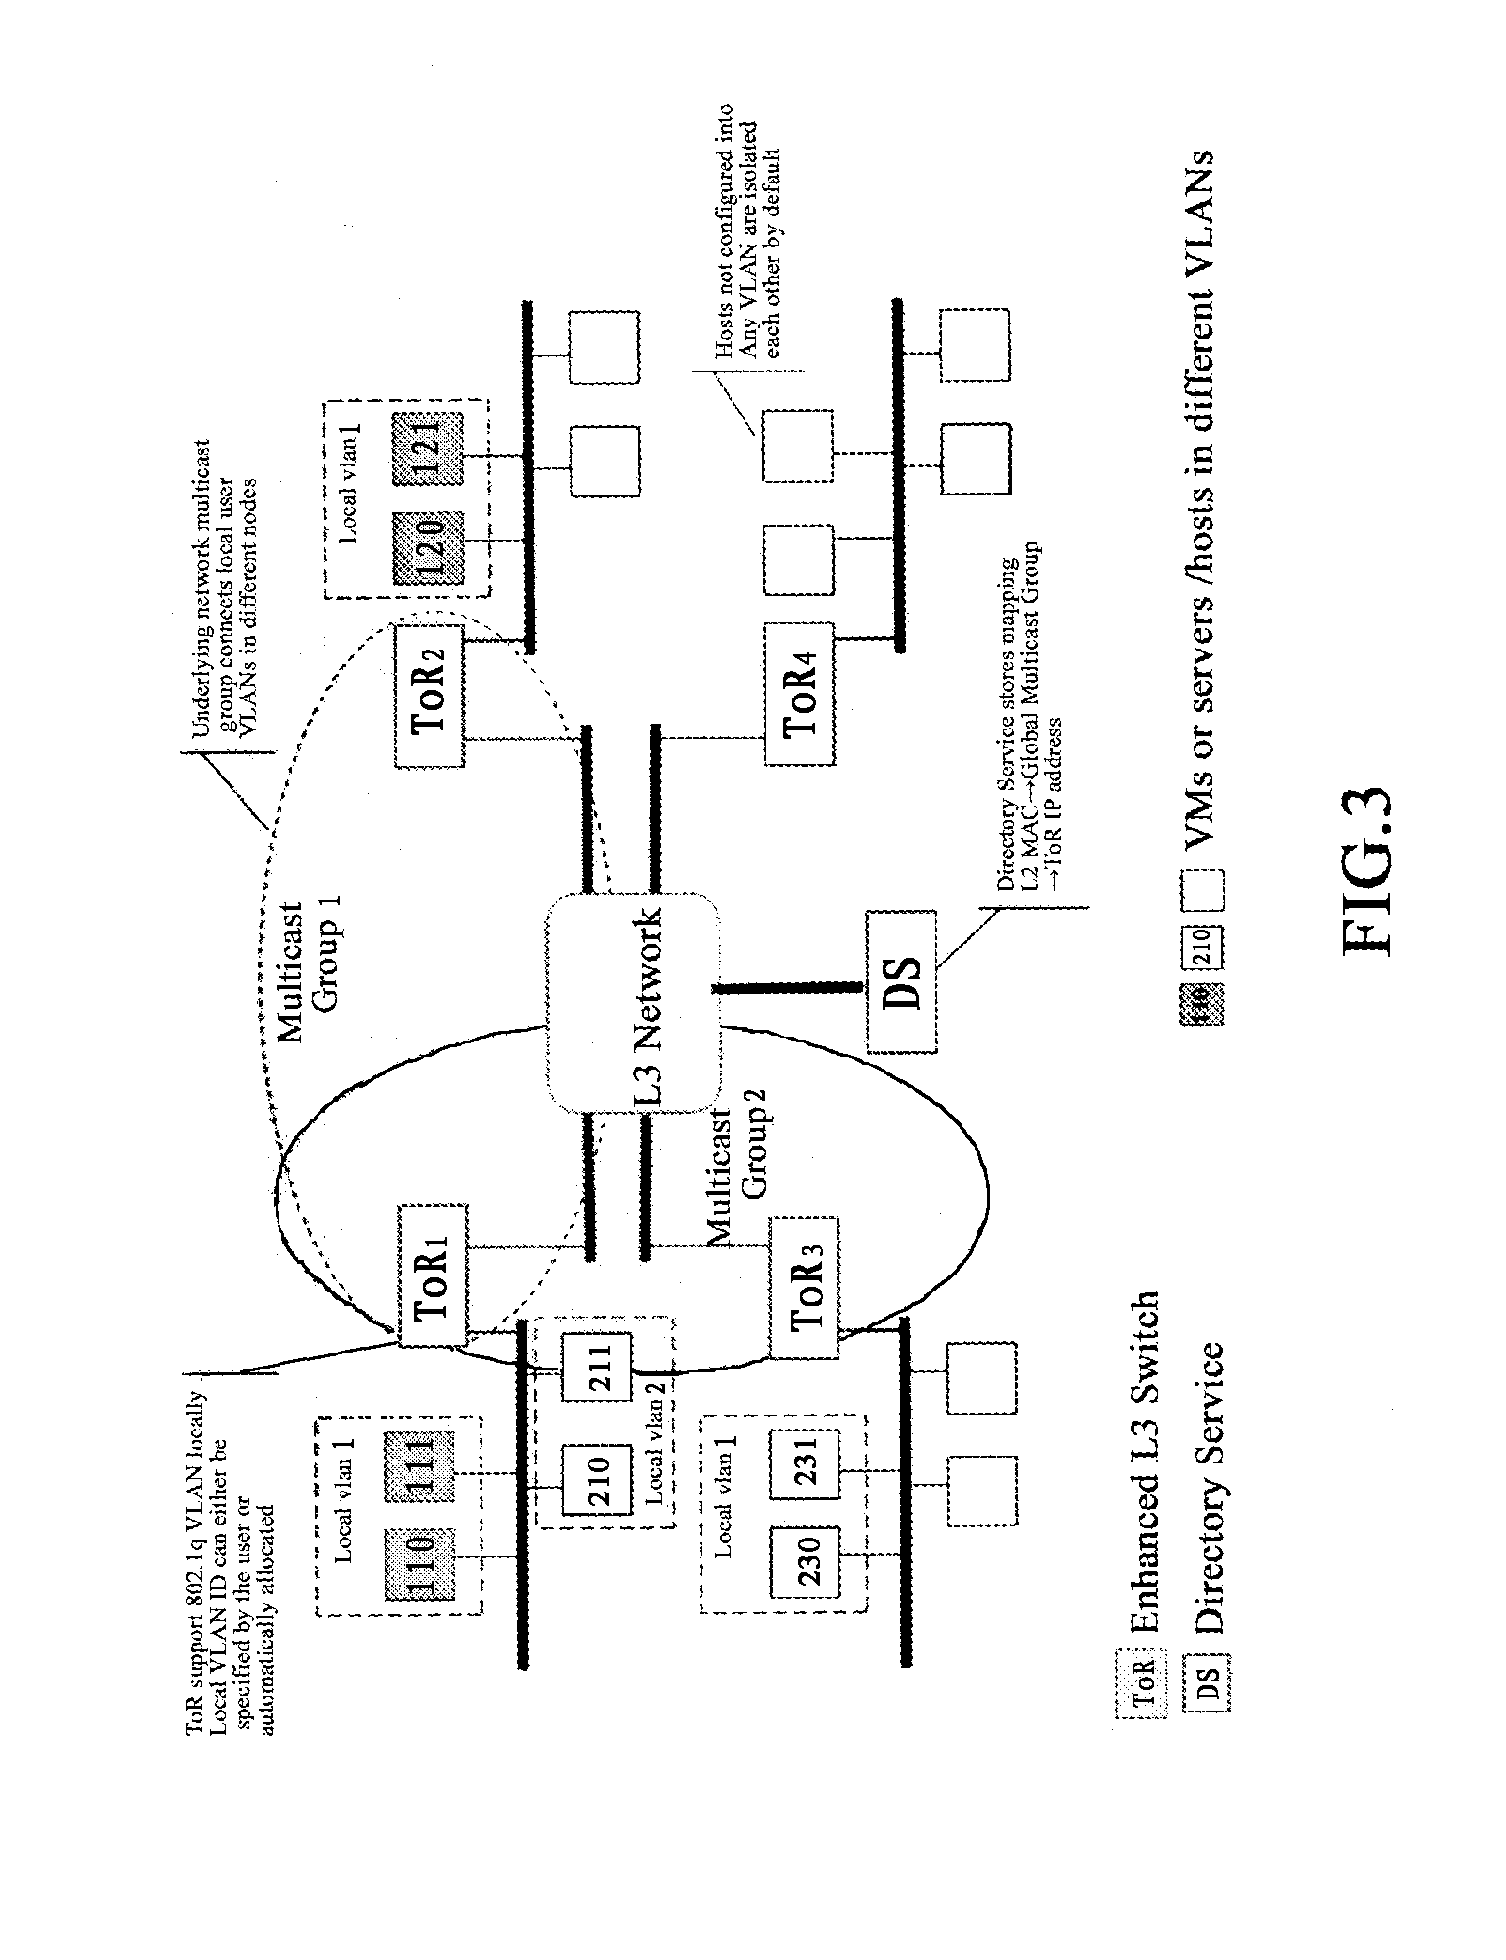 Method and apparatus for implementing a flexible virtual local area network